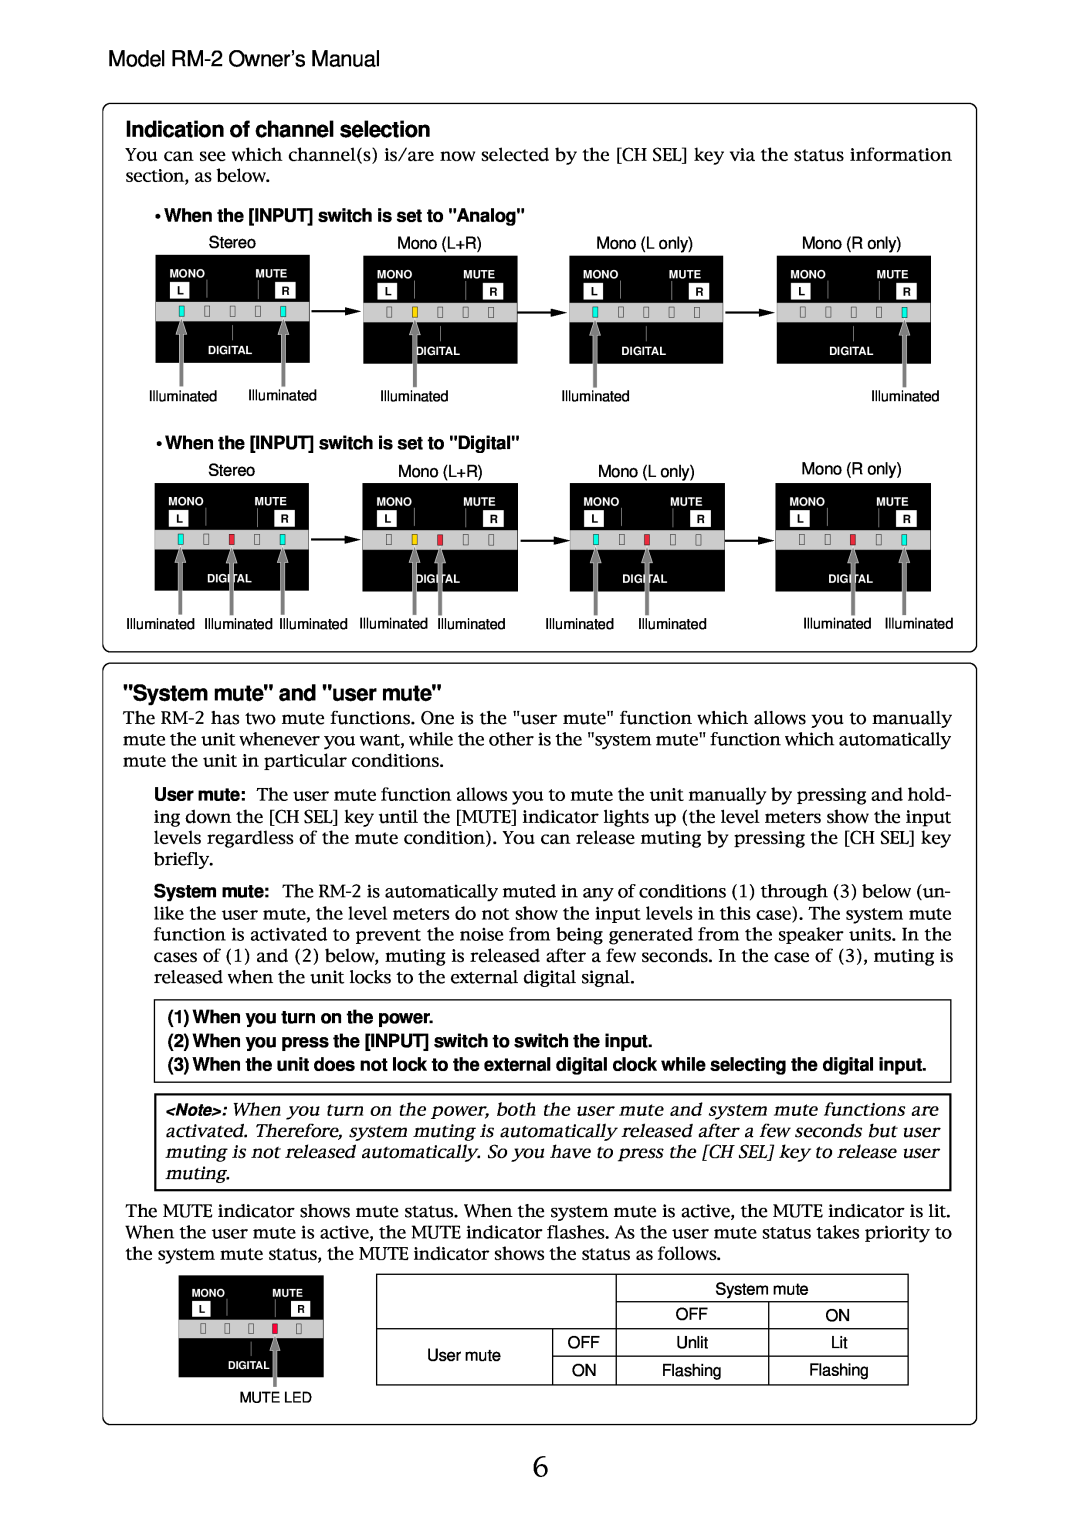 Fostex RM-2 Indication of channel selection, System mute and user mute, When the INPUT switch is set to Analog, Stereo 